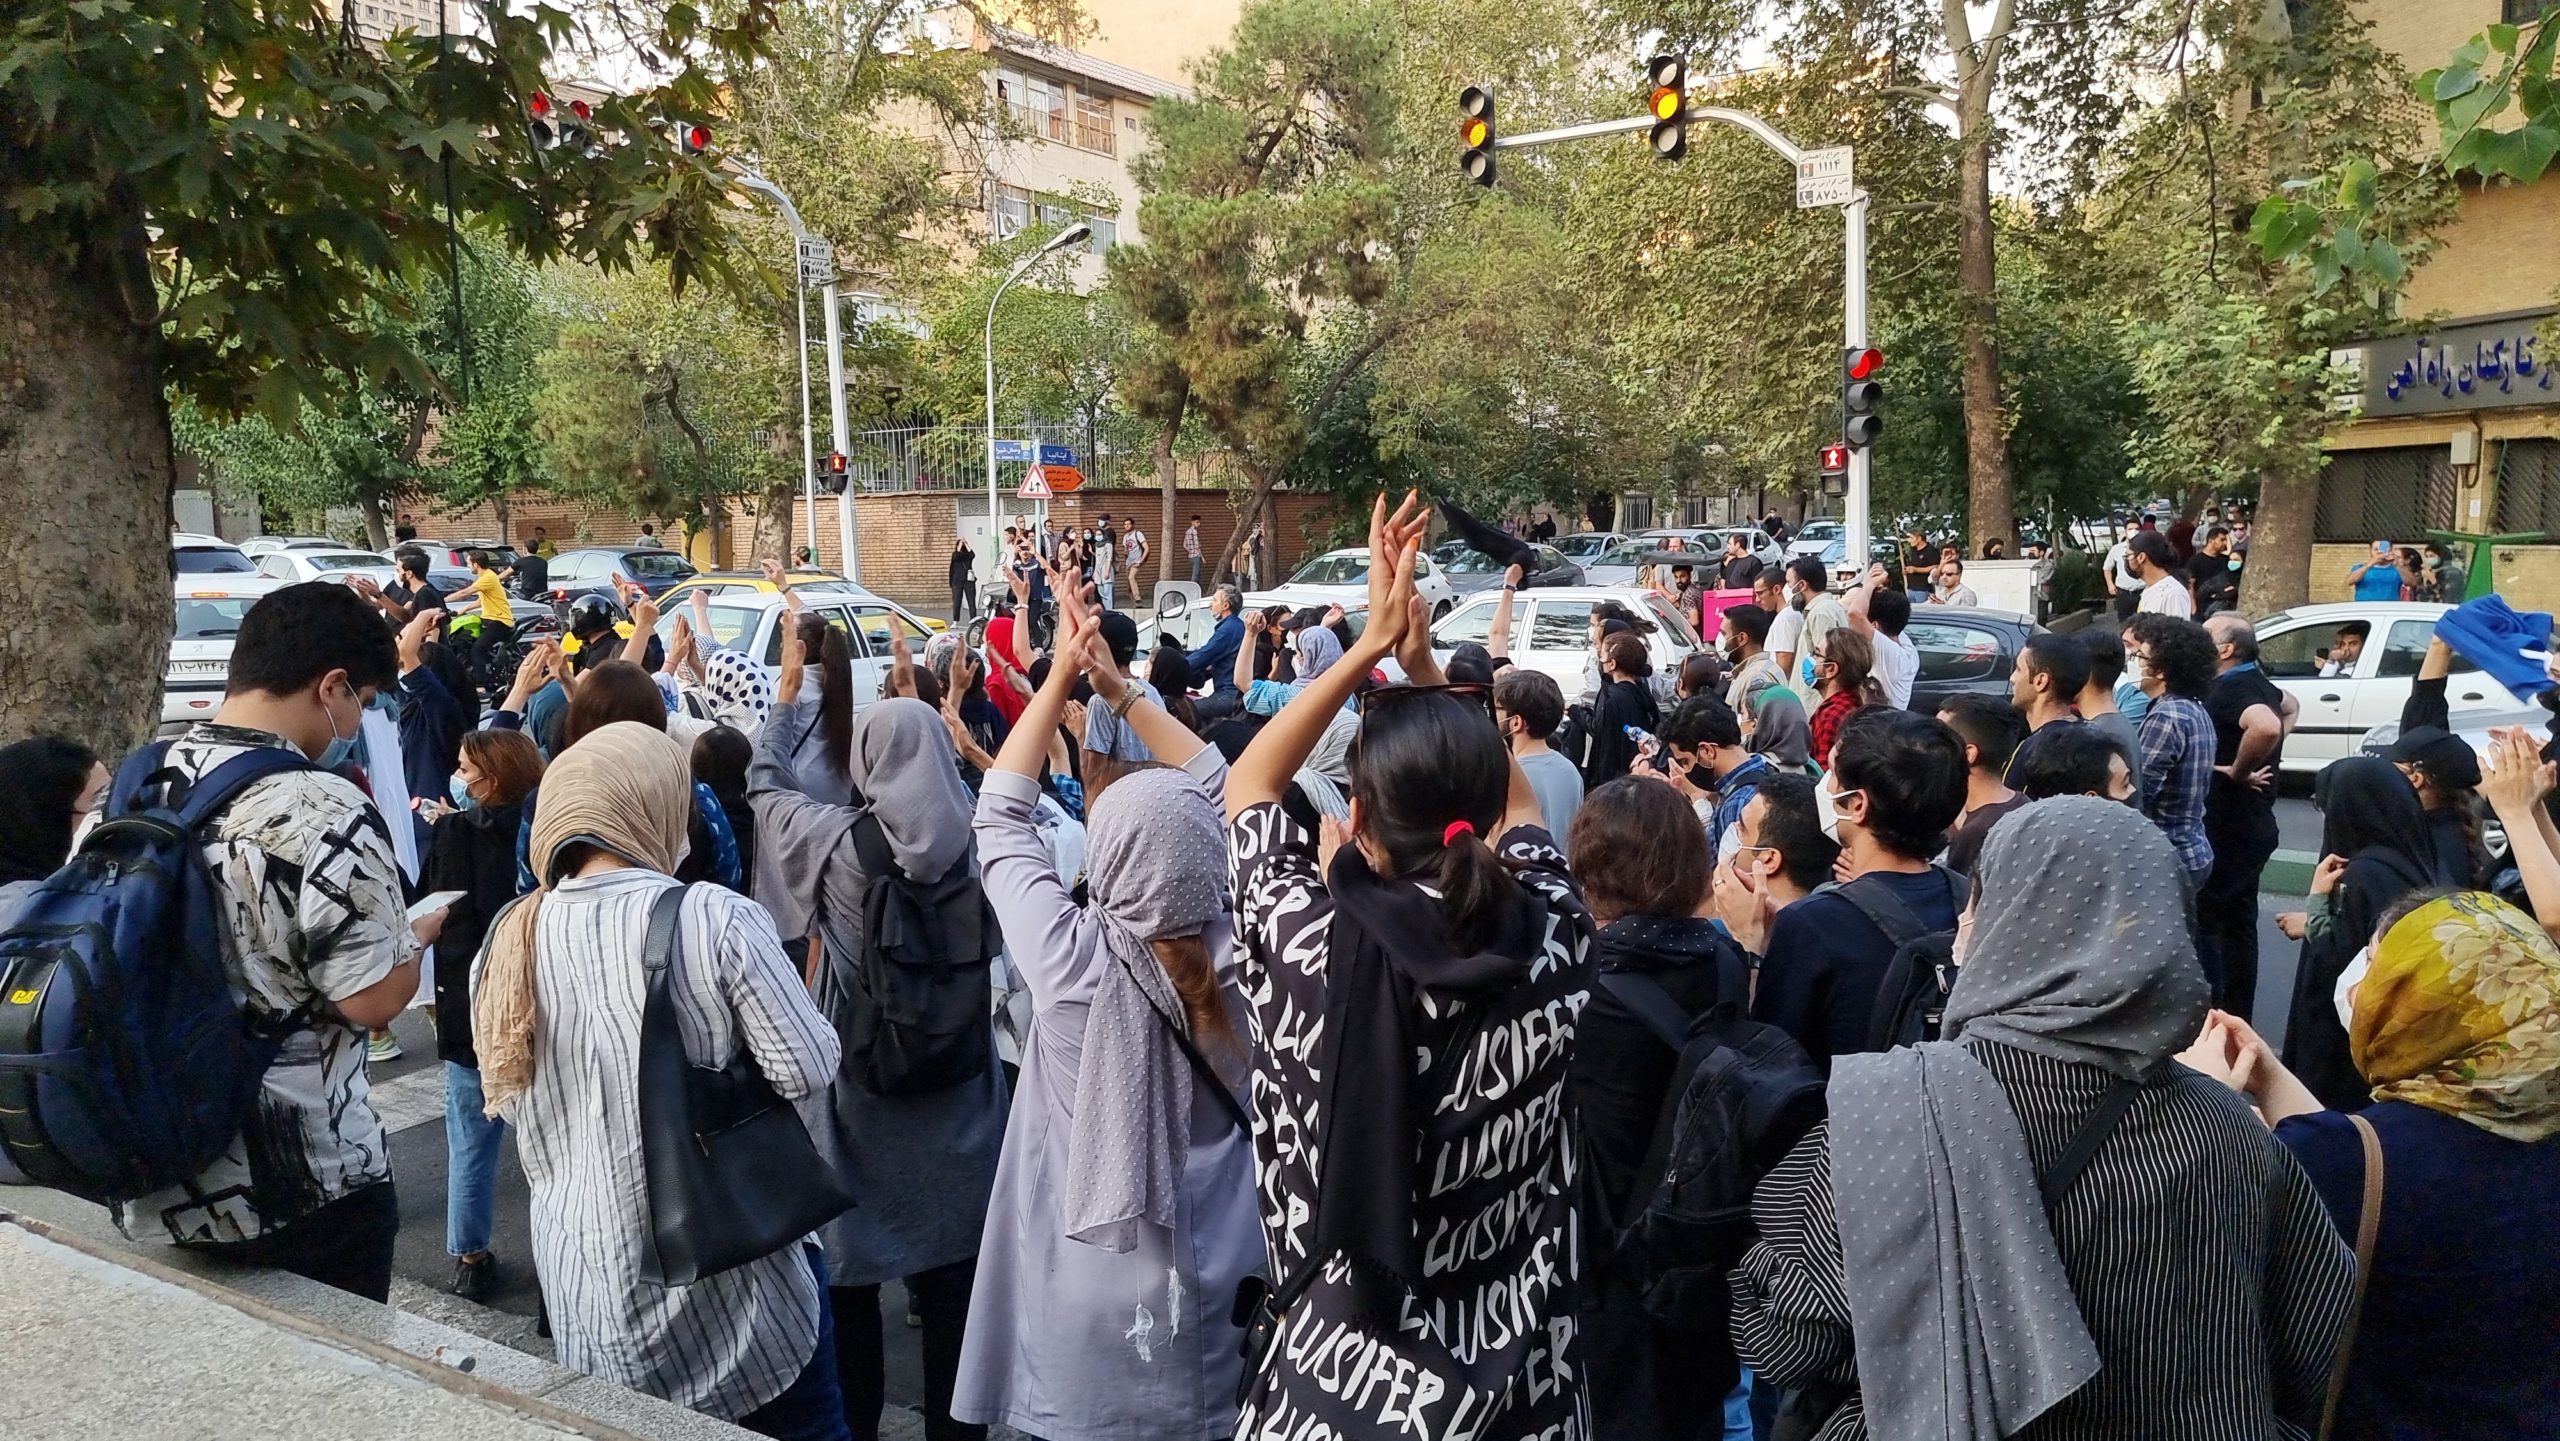 In Iran, protests have led to violent clashes between citizens and security forces. Protesters pict...